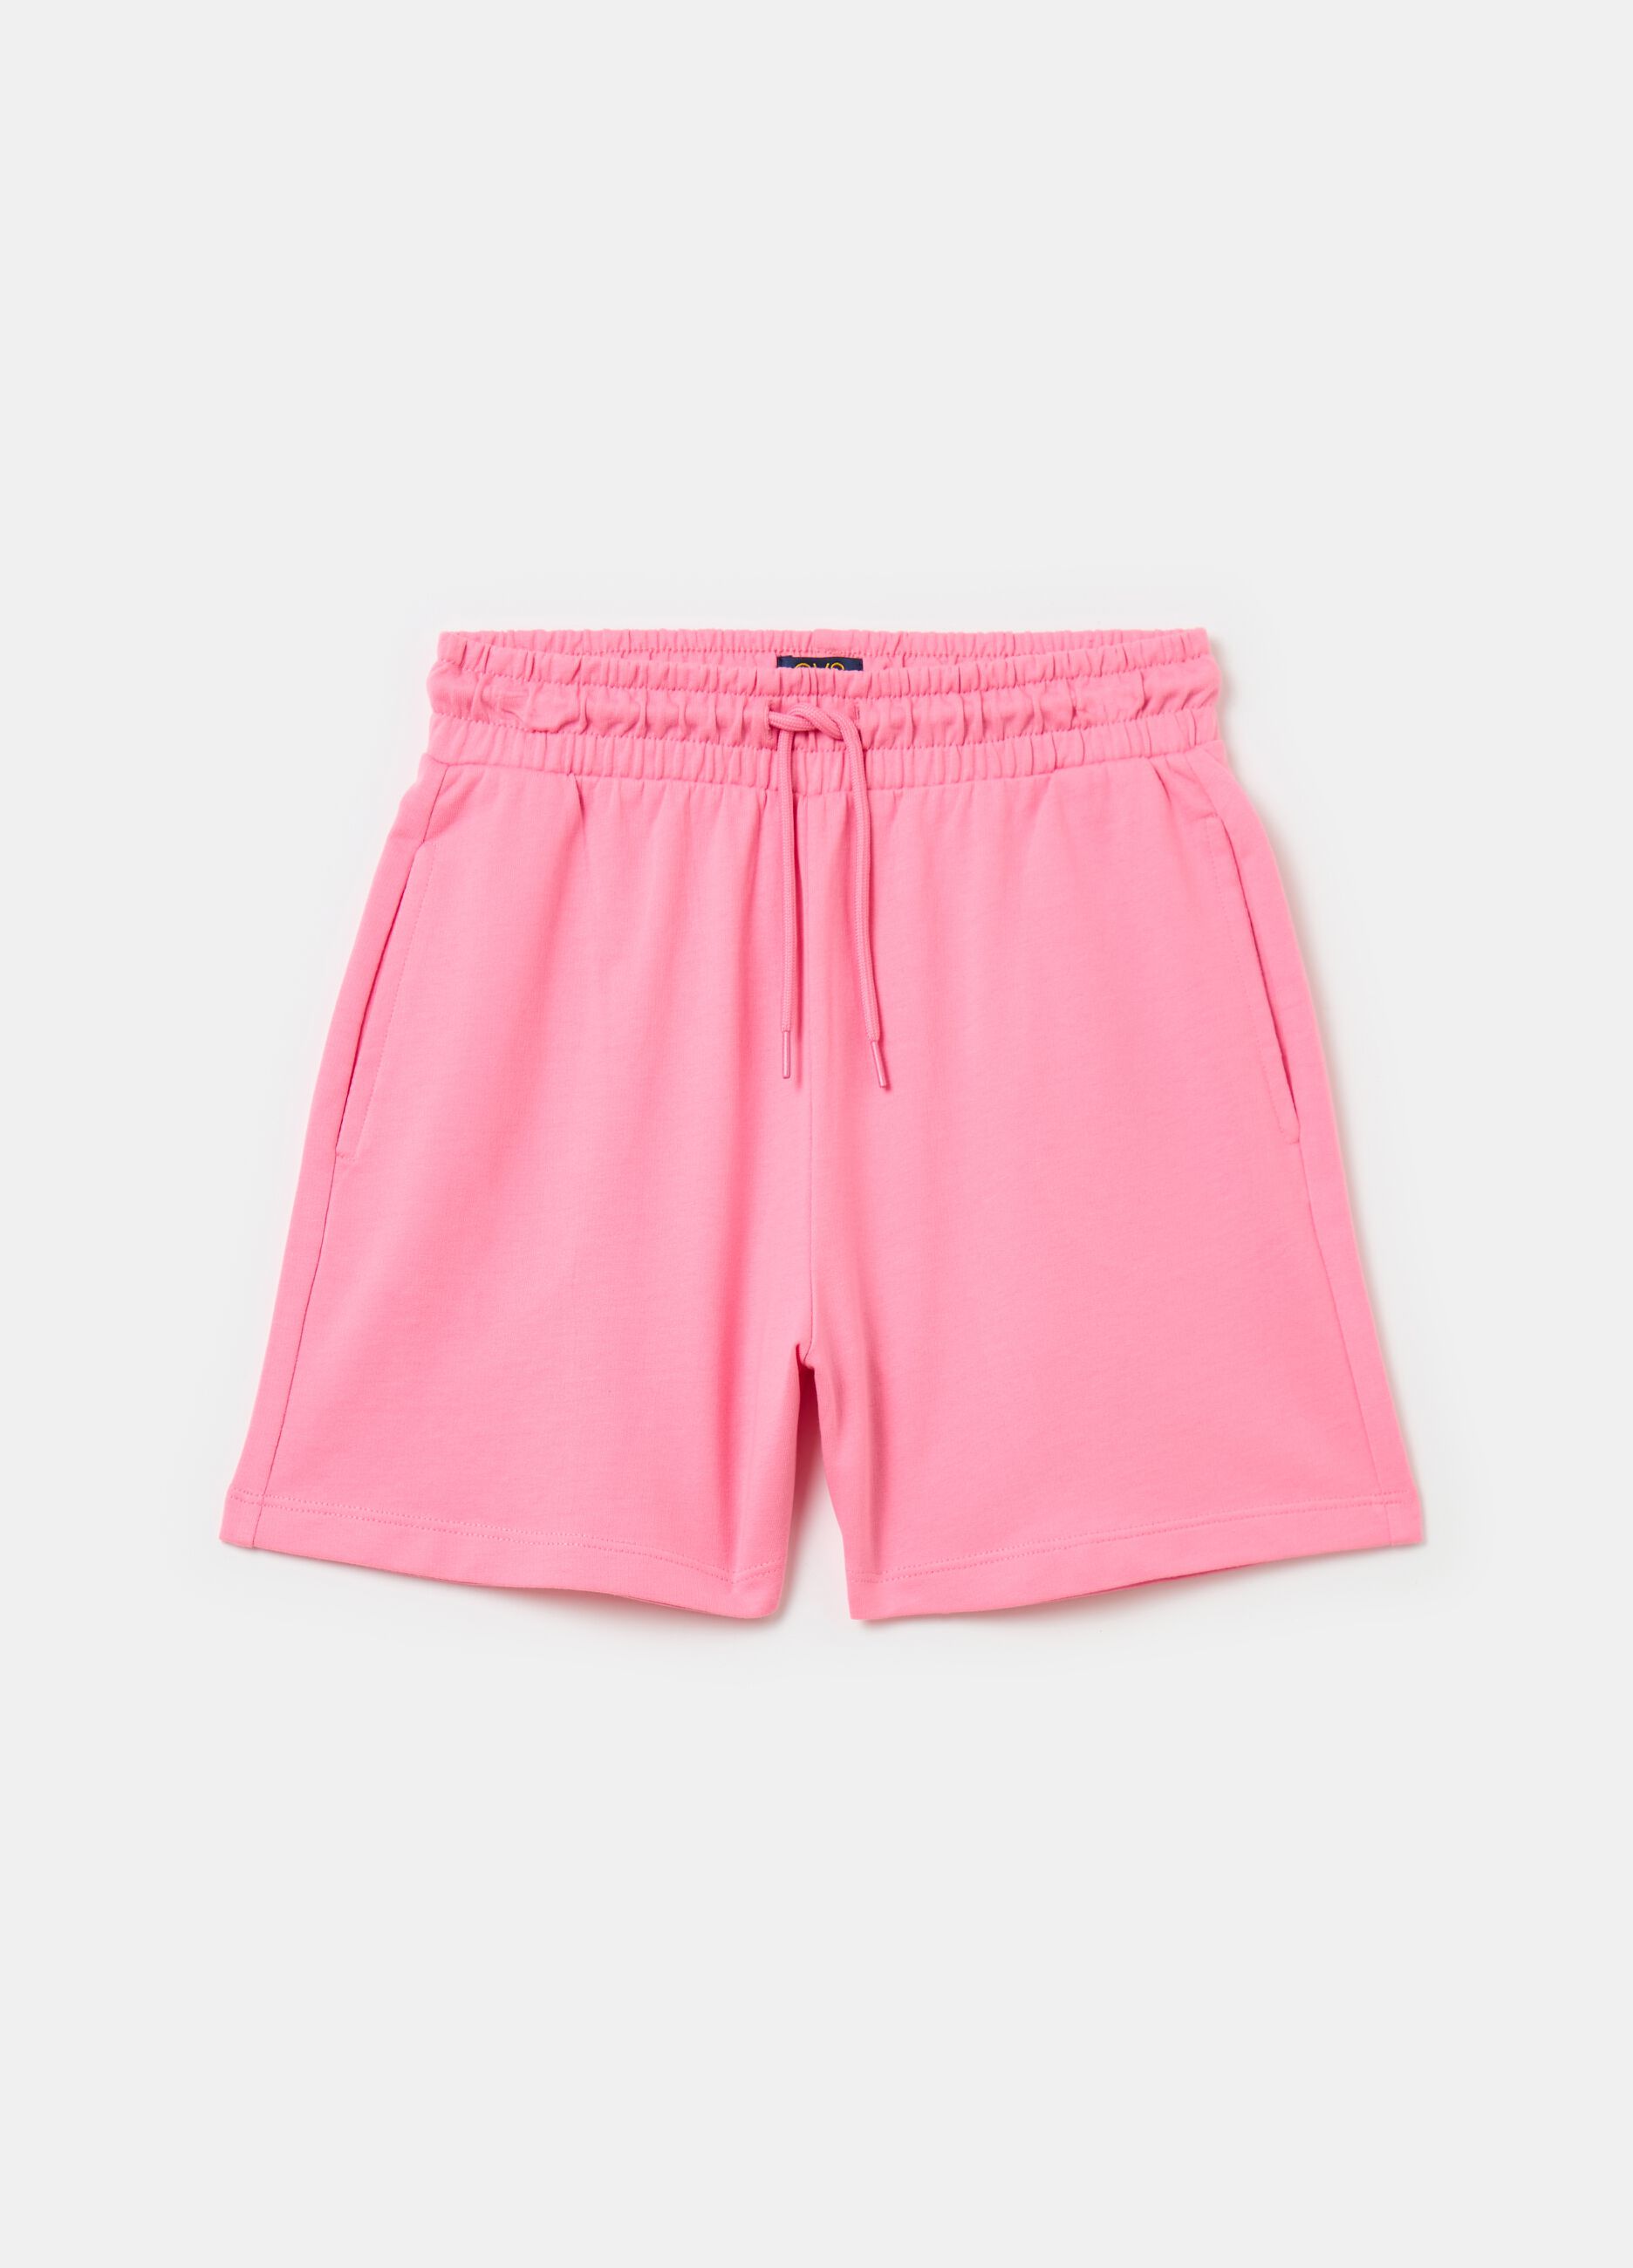 Shorts in French terry with drawstring